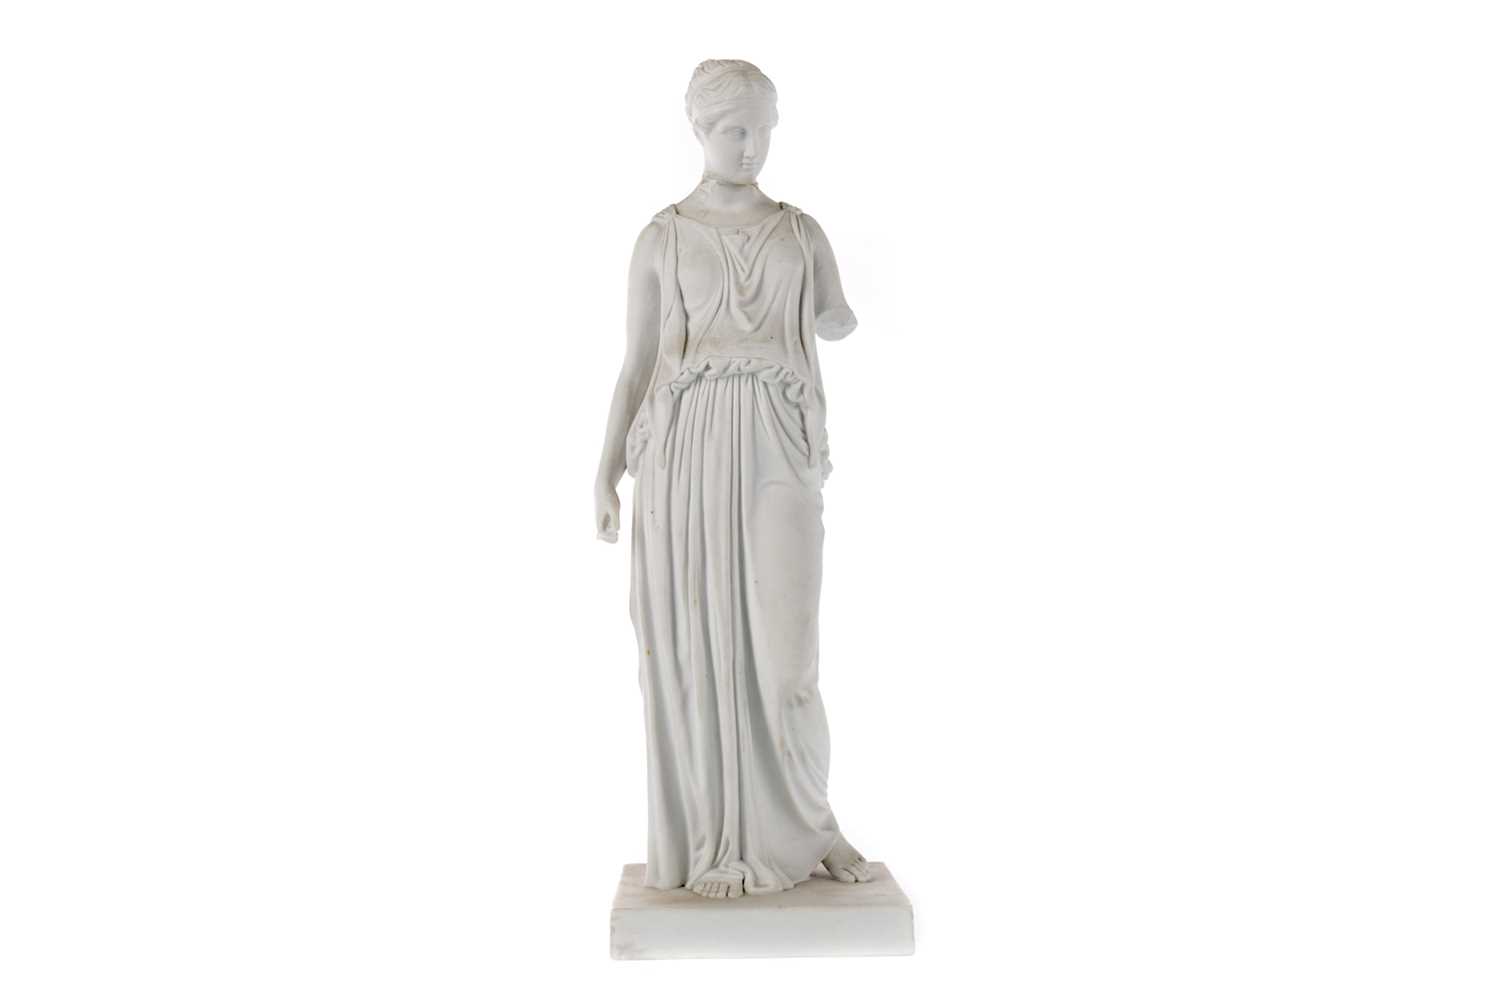 Lot 28 - A LATE 19TH CENTURY ROYAL COPENHAGEN BISCUIT PORCELAIN FIGURE OF A CLASSICAL FEMALE